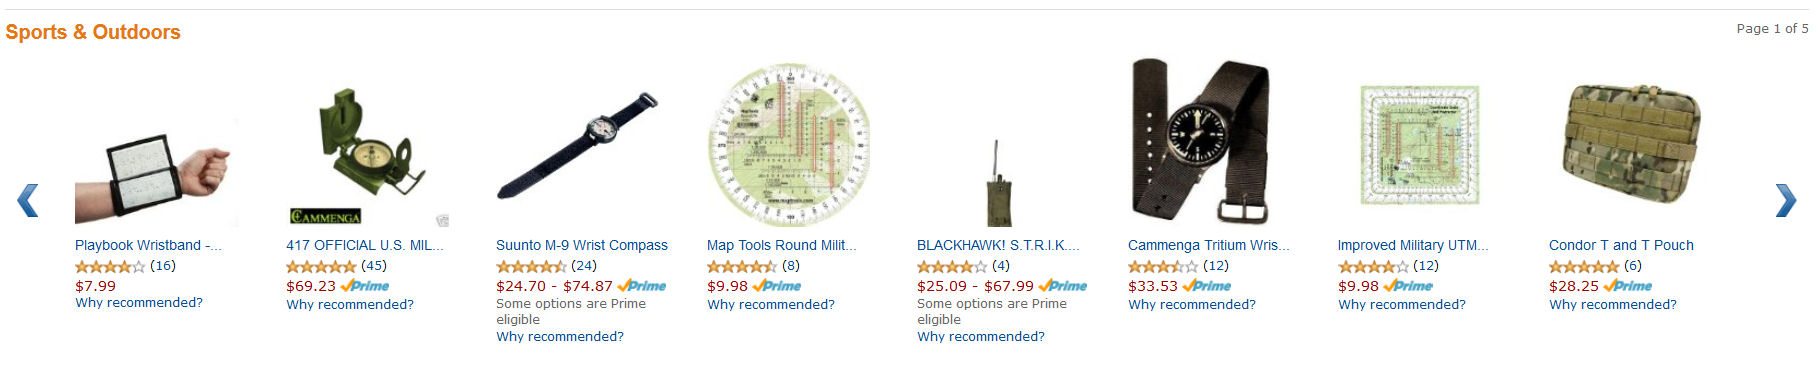 Amazon Recommends I buy a load of shite like tactical survival guidebooks for a post apocalyptic society